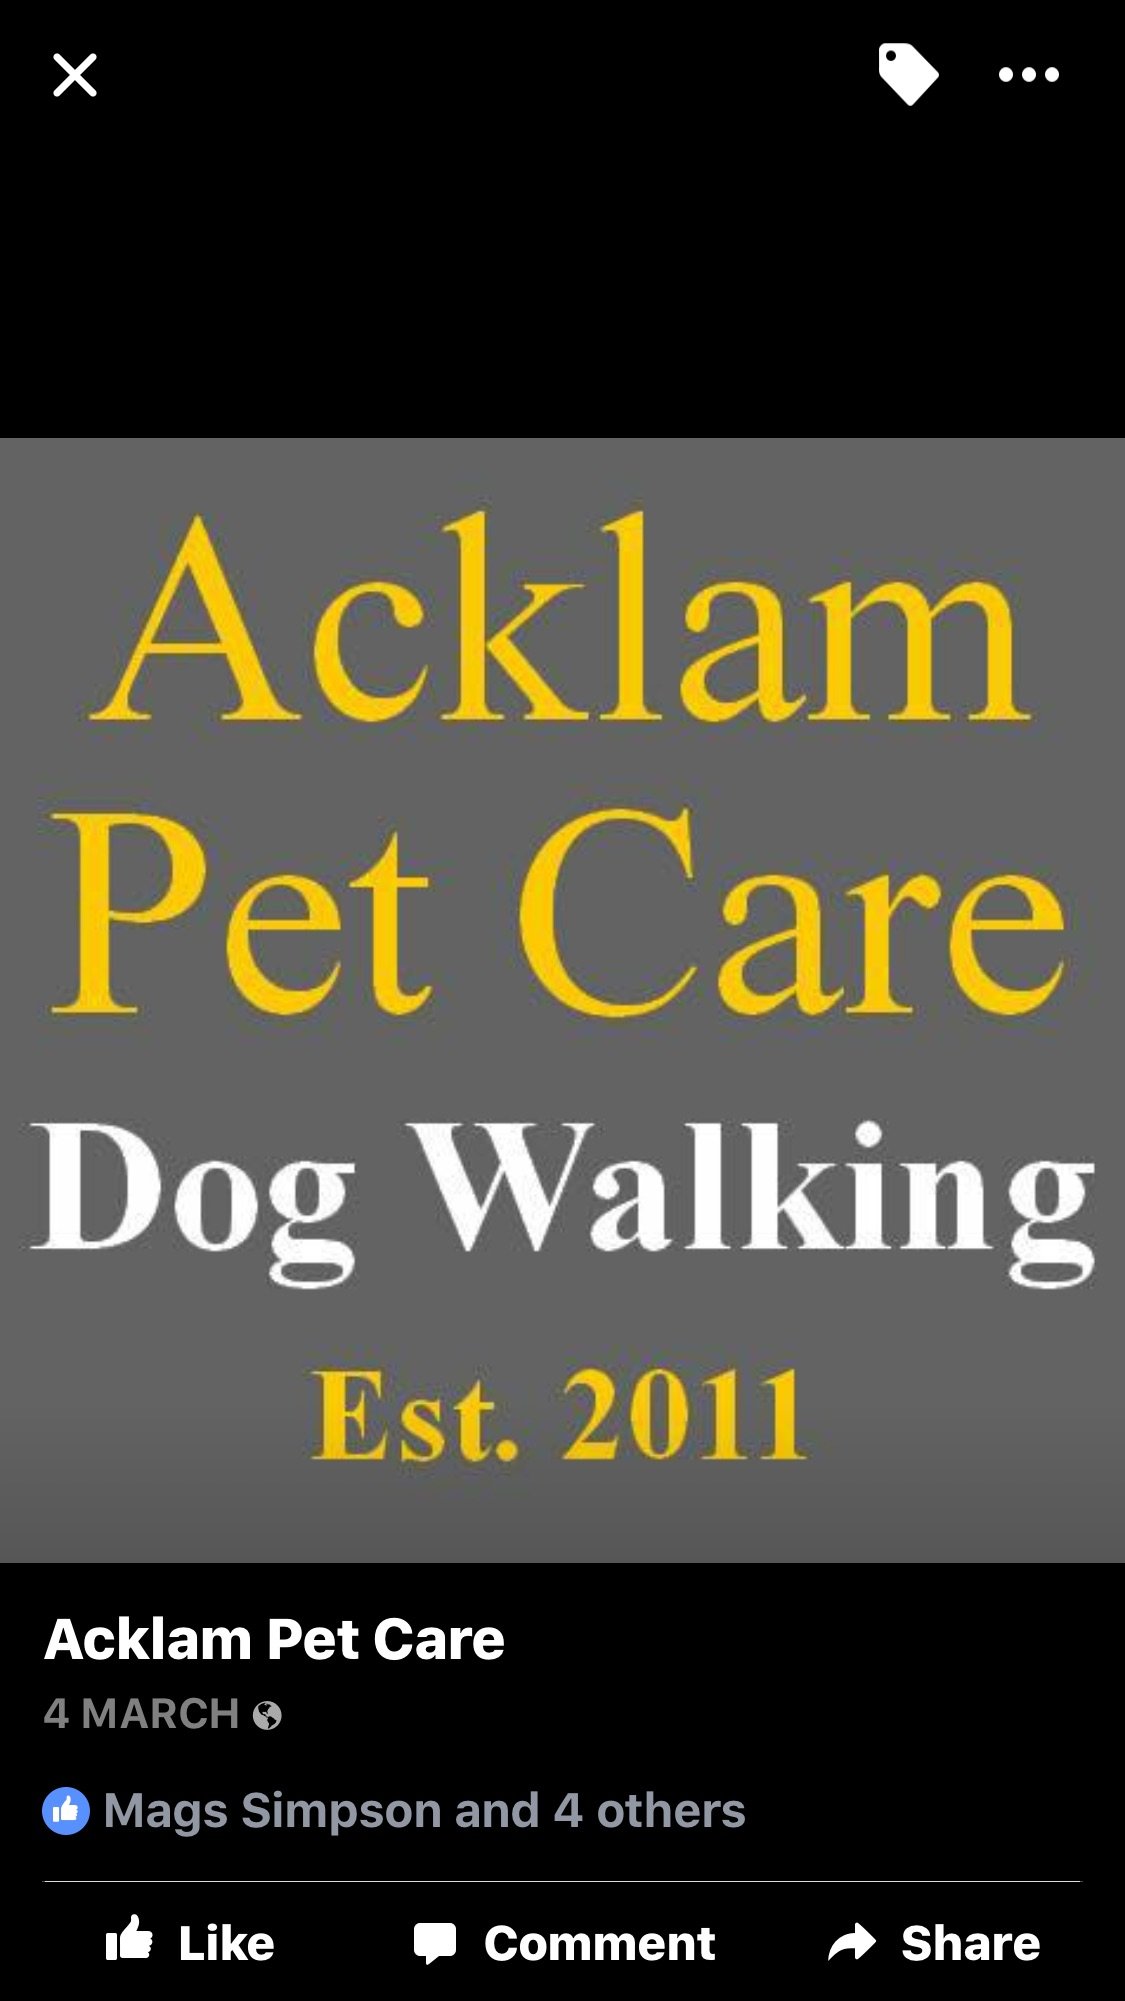 Acklam Pet Care provides a quality, professional Dog Walking Service to certain areas of Middlesbrough. Please check our website to see if we cover your area.